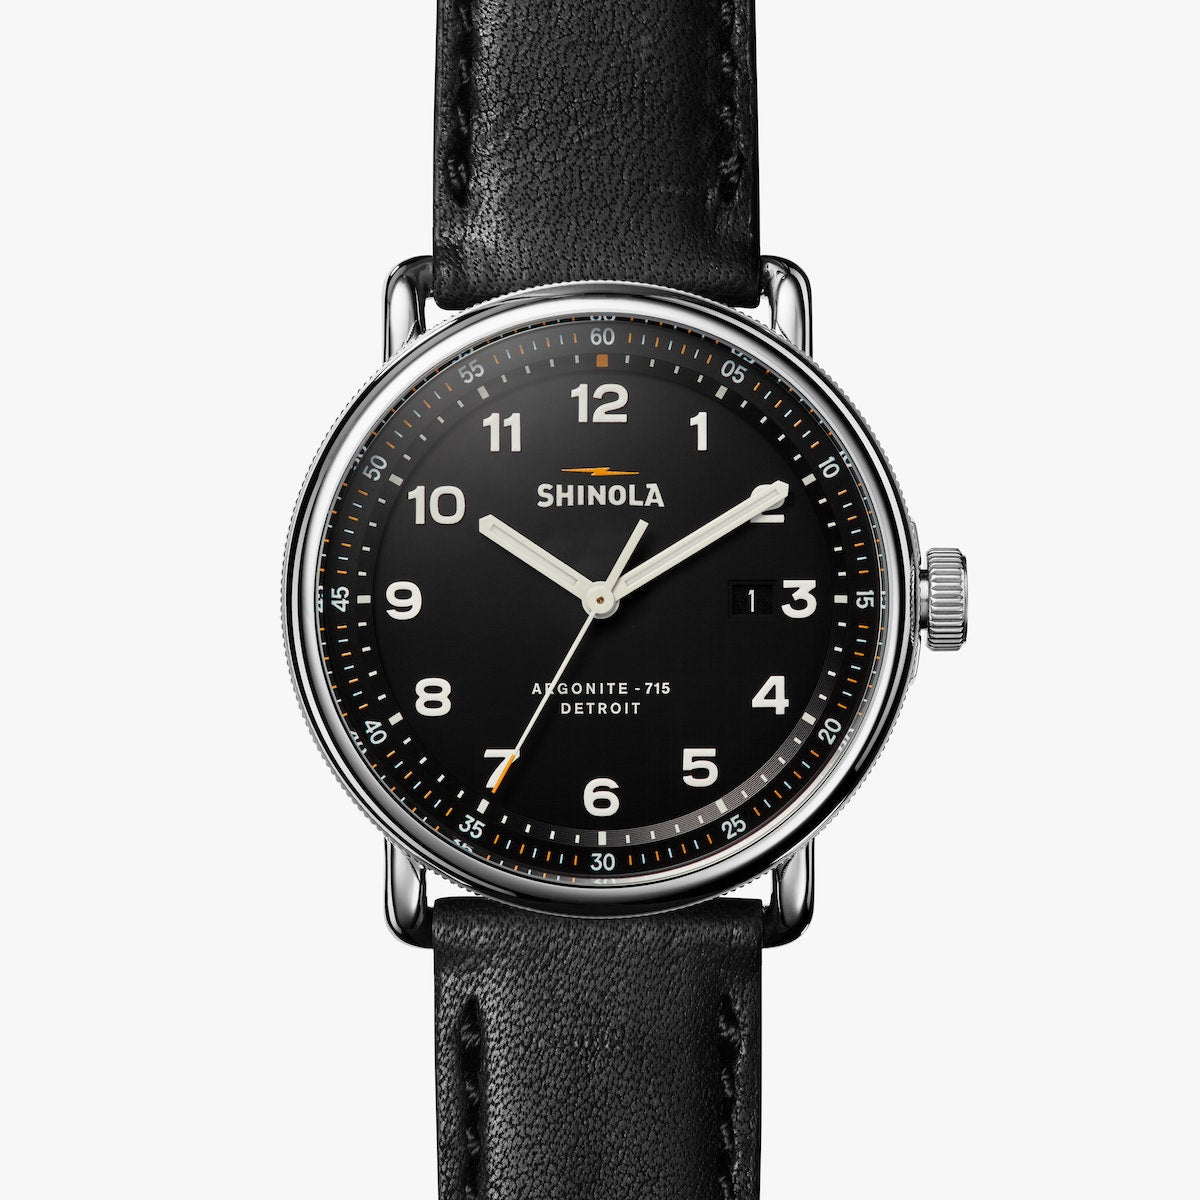 The Canfield Model C56 43mm in Black